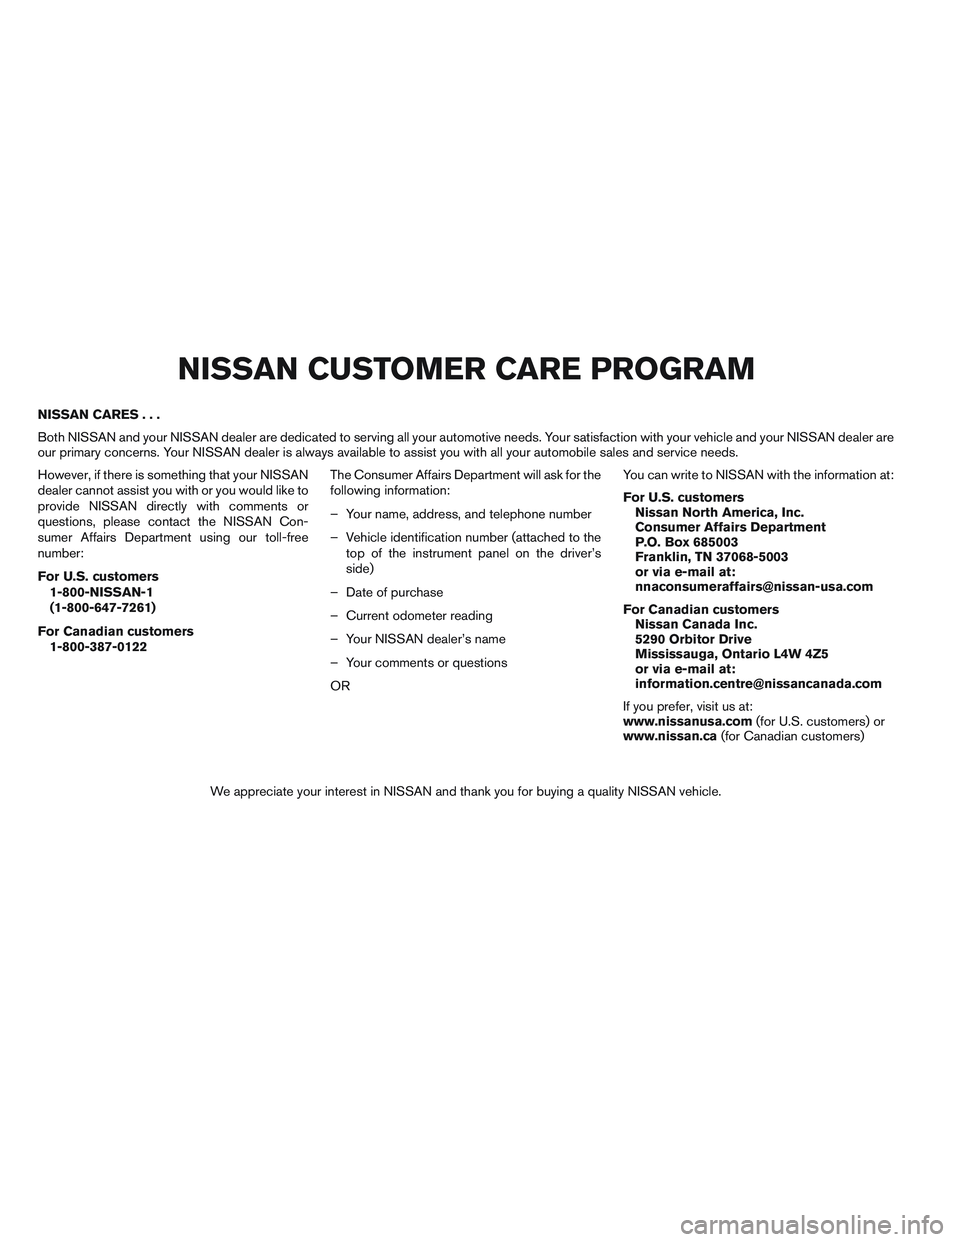 NISSAN VERSA 2014  Owners Manual NISSAN CARES...
Both NISSAN and your NISSAN dealer are dedicated to serving all your automotive needs. Your satisfaction with your vehicle and your NISSAN dealer are
our primary concerns. Your NISSAN 